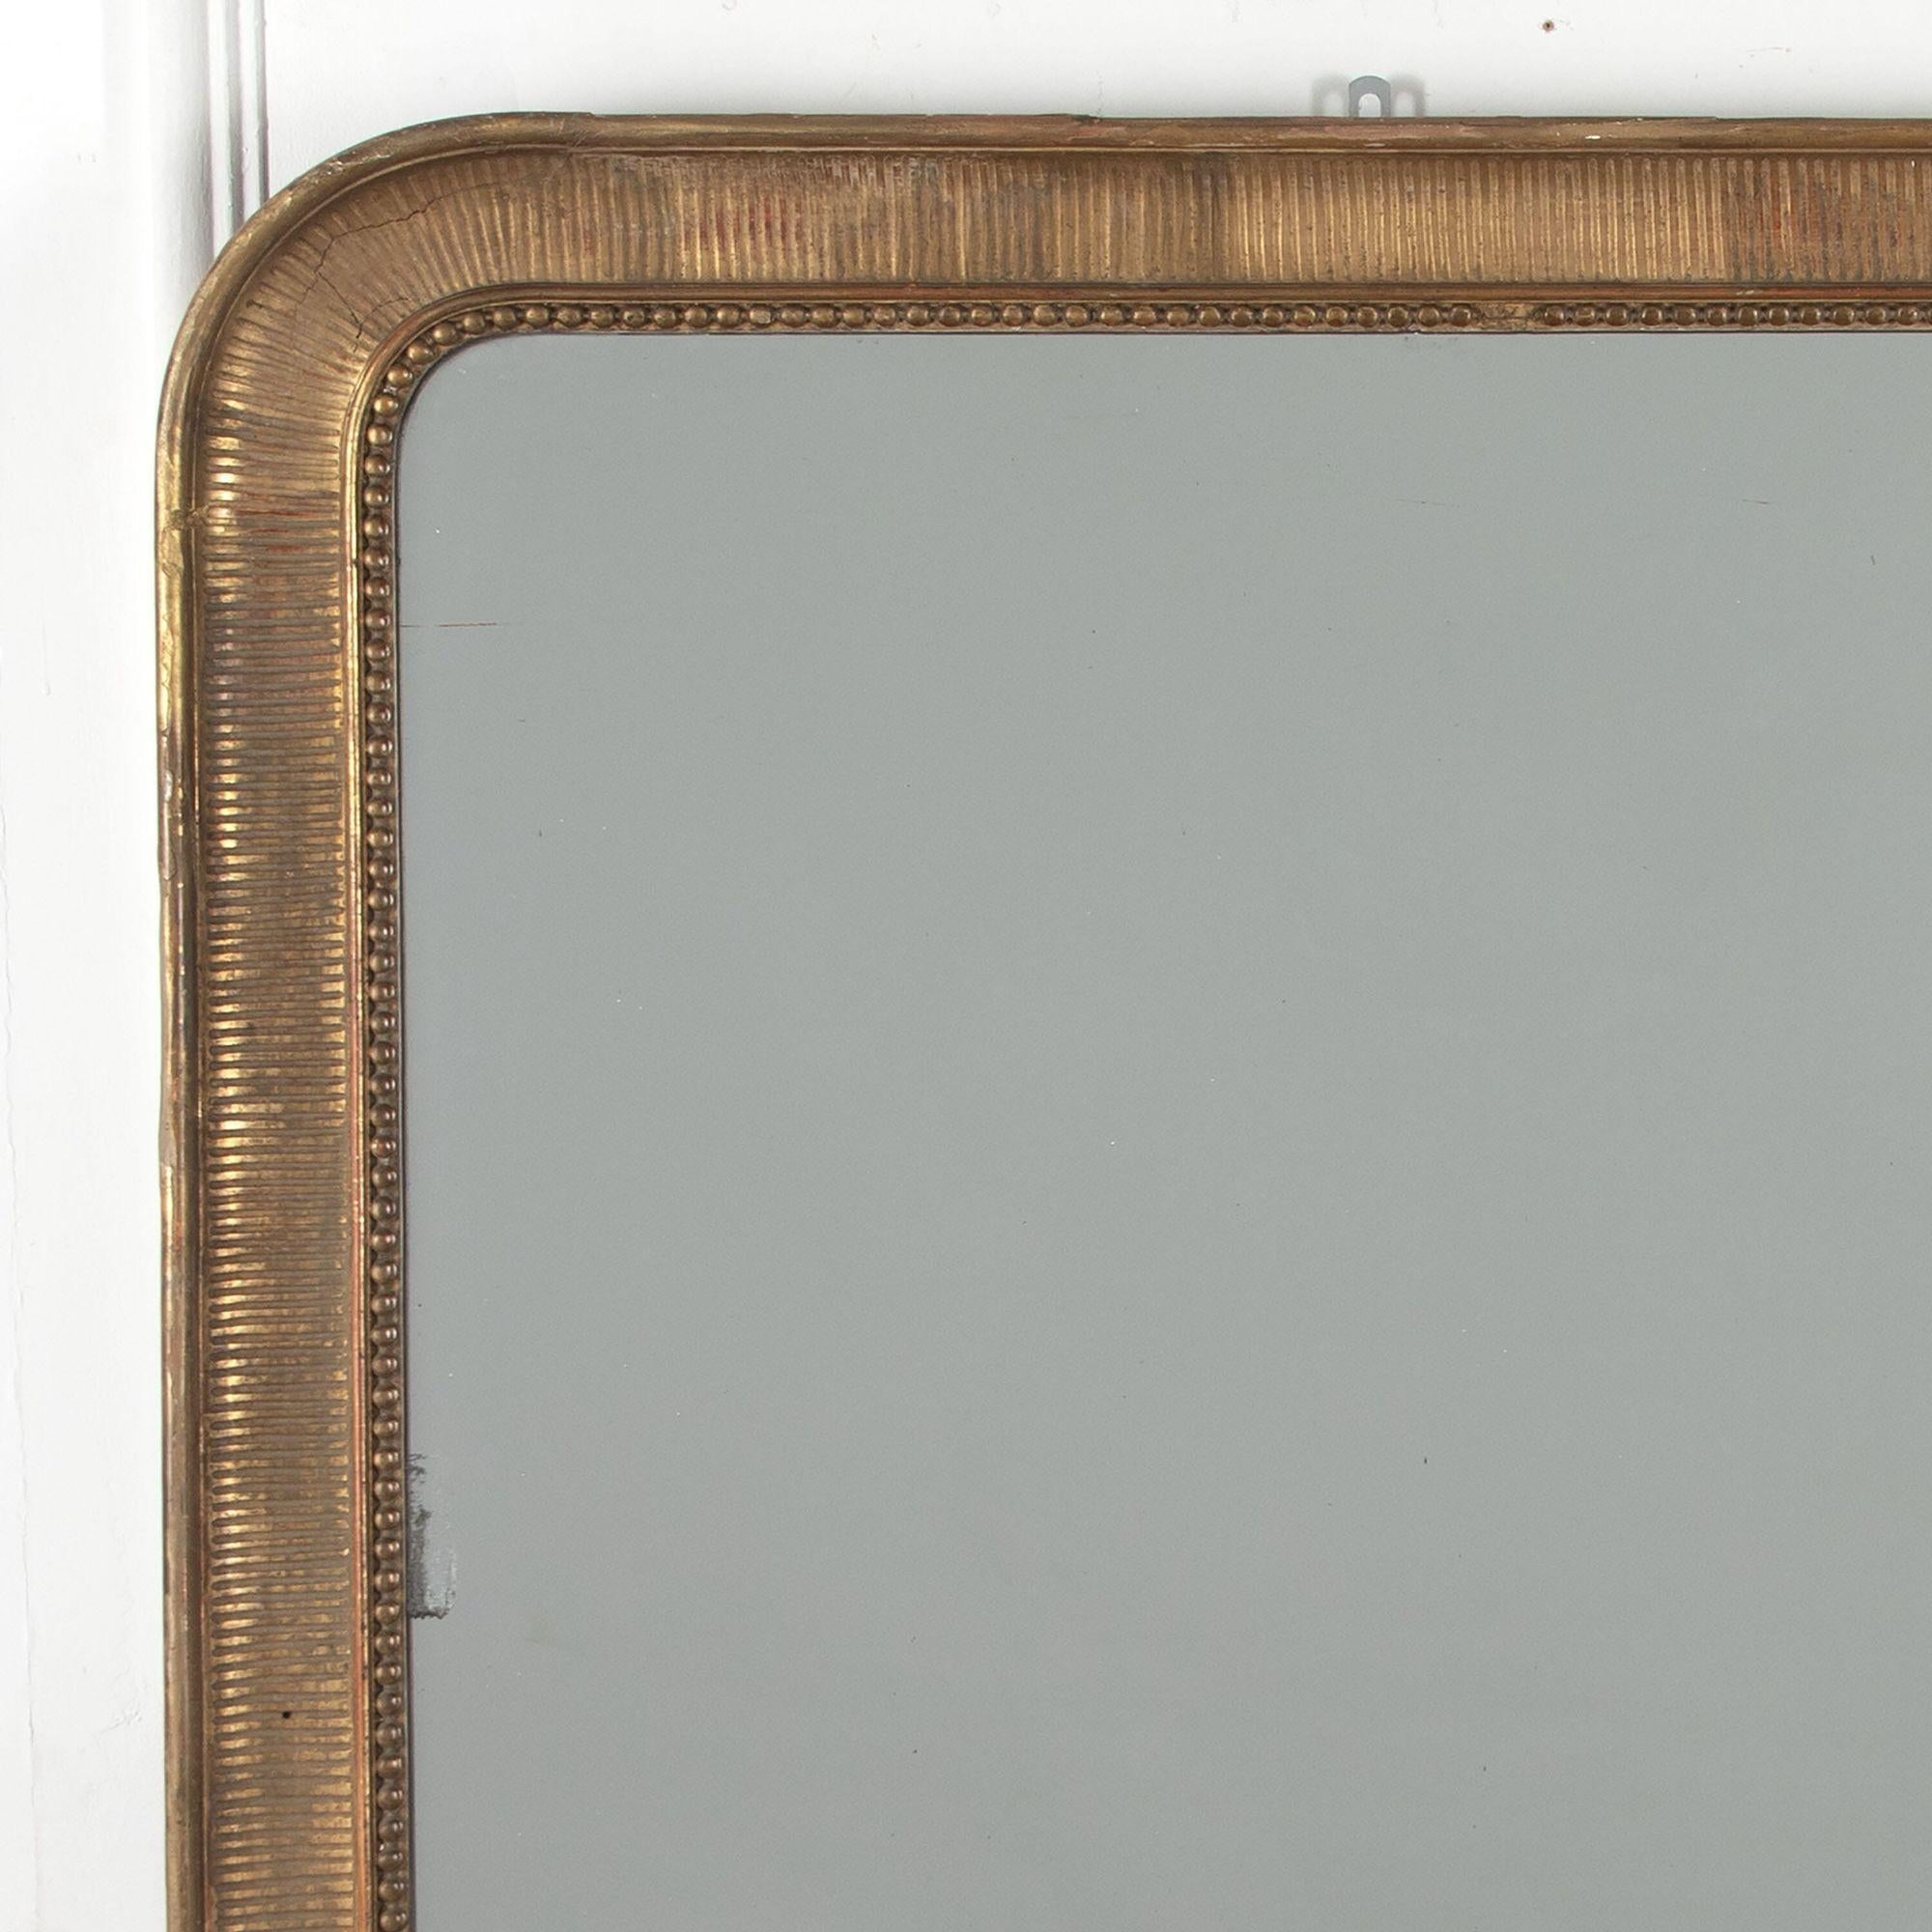 19th century tall gold gilt Louis Philippe mirror.
With elegantly carved bead surround and ribbed decorative frame and original mirror plate.
With statement proportions, circa 1860.